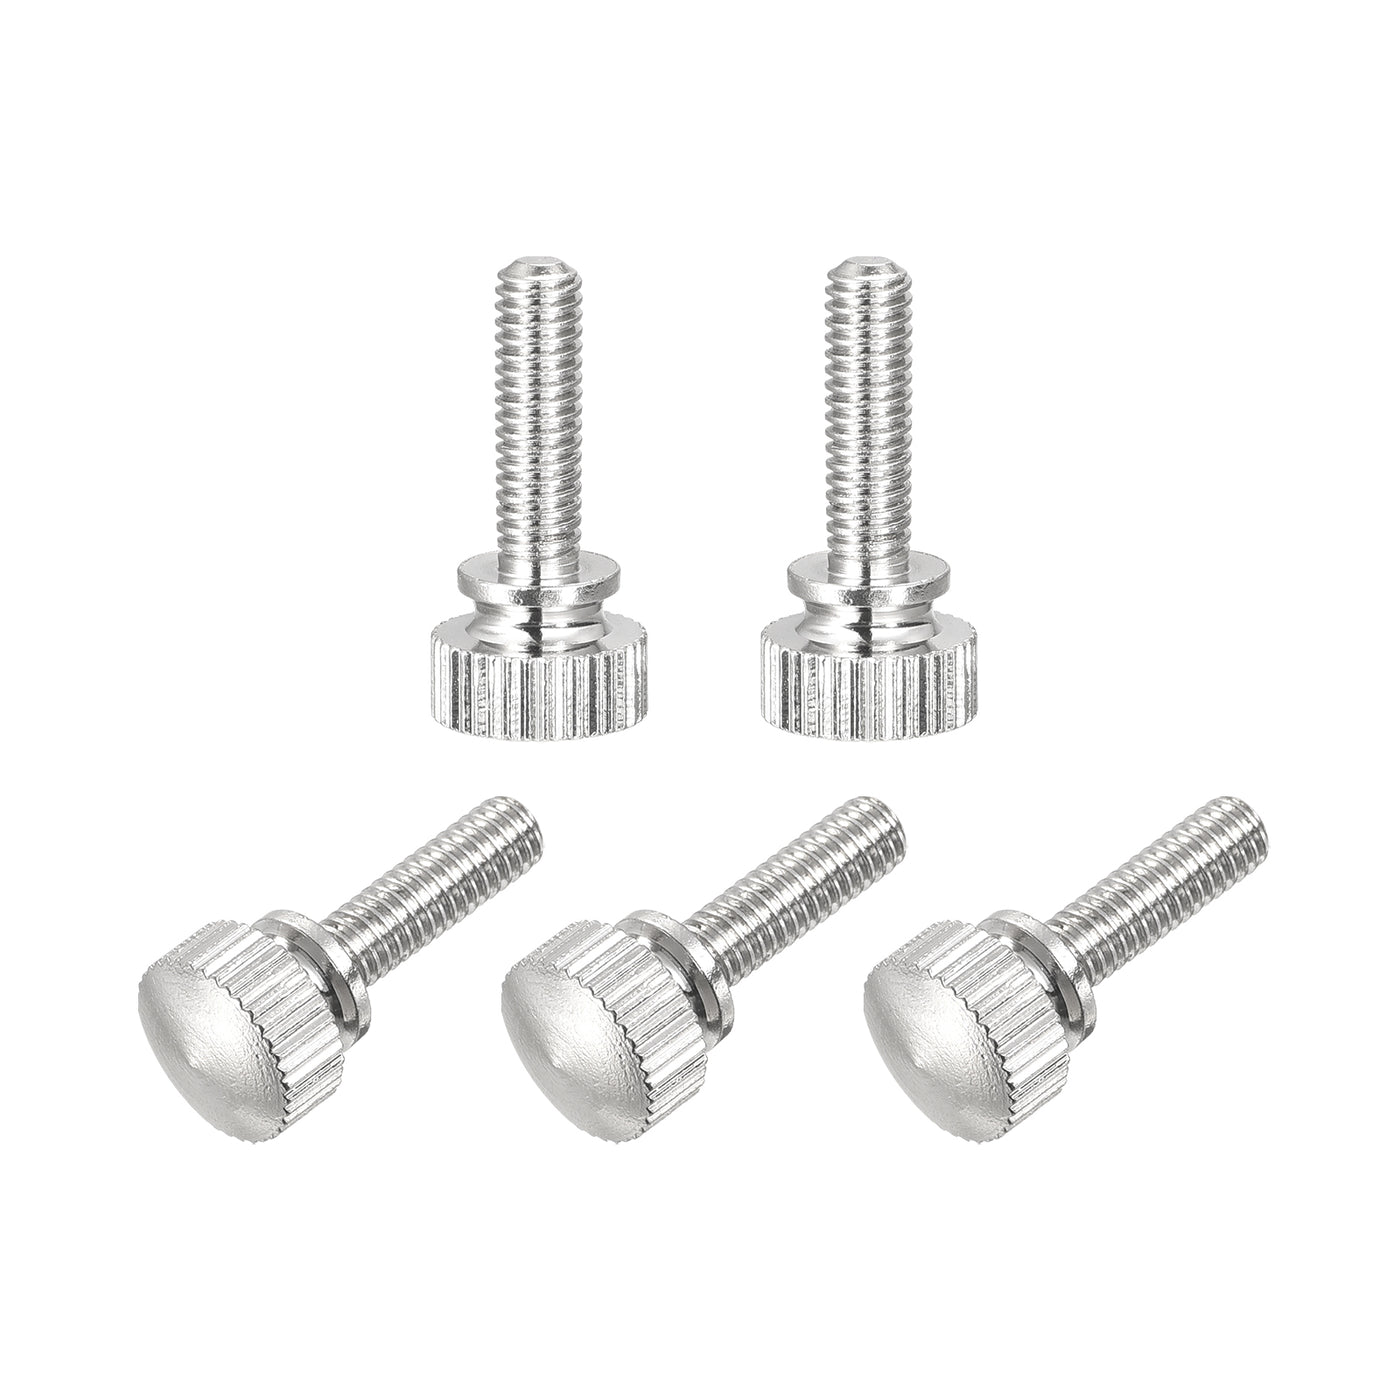 uxcell Uxcell Knurled Thumb Screws, M4x14mm Brass Shoulder Bolts Grip Knobs Fasteners, Nickel Plated 5Pcs